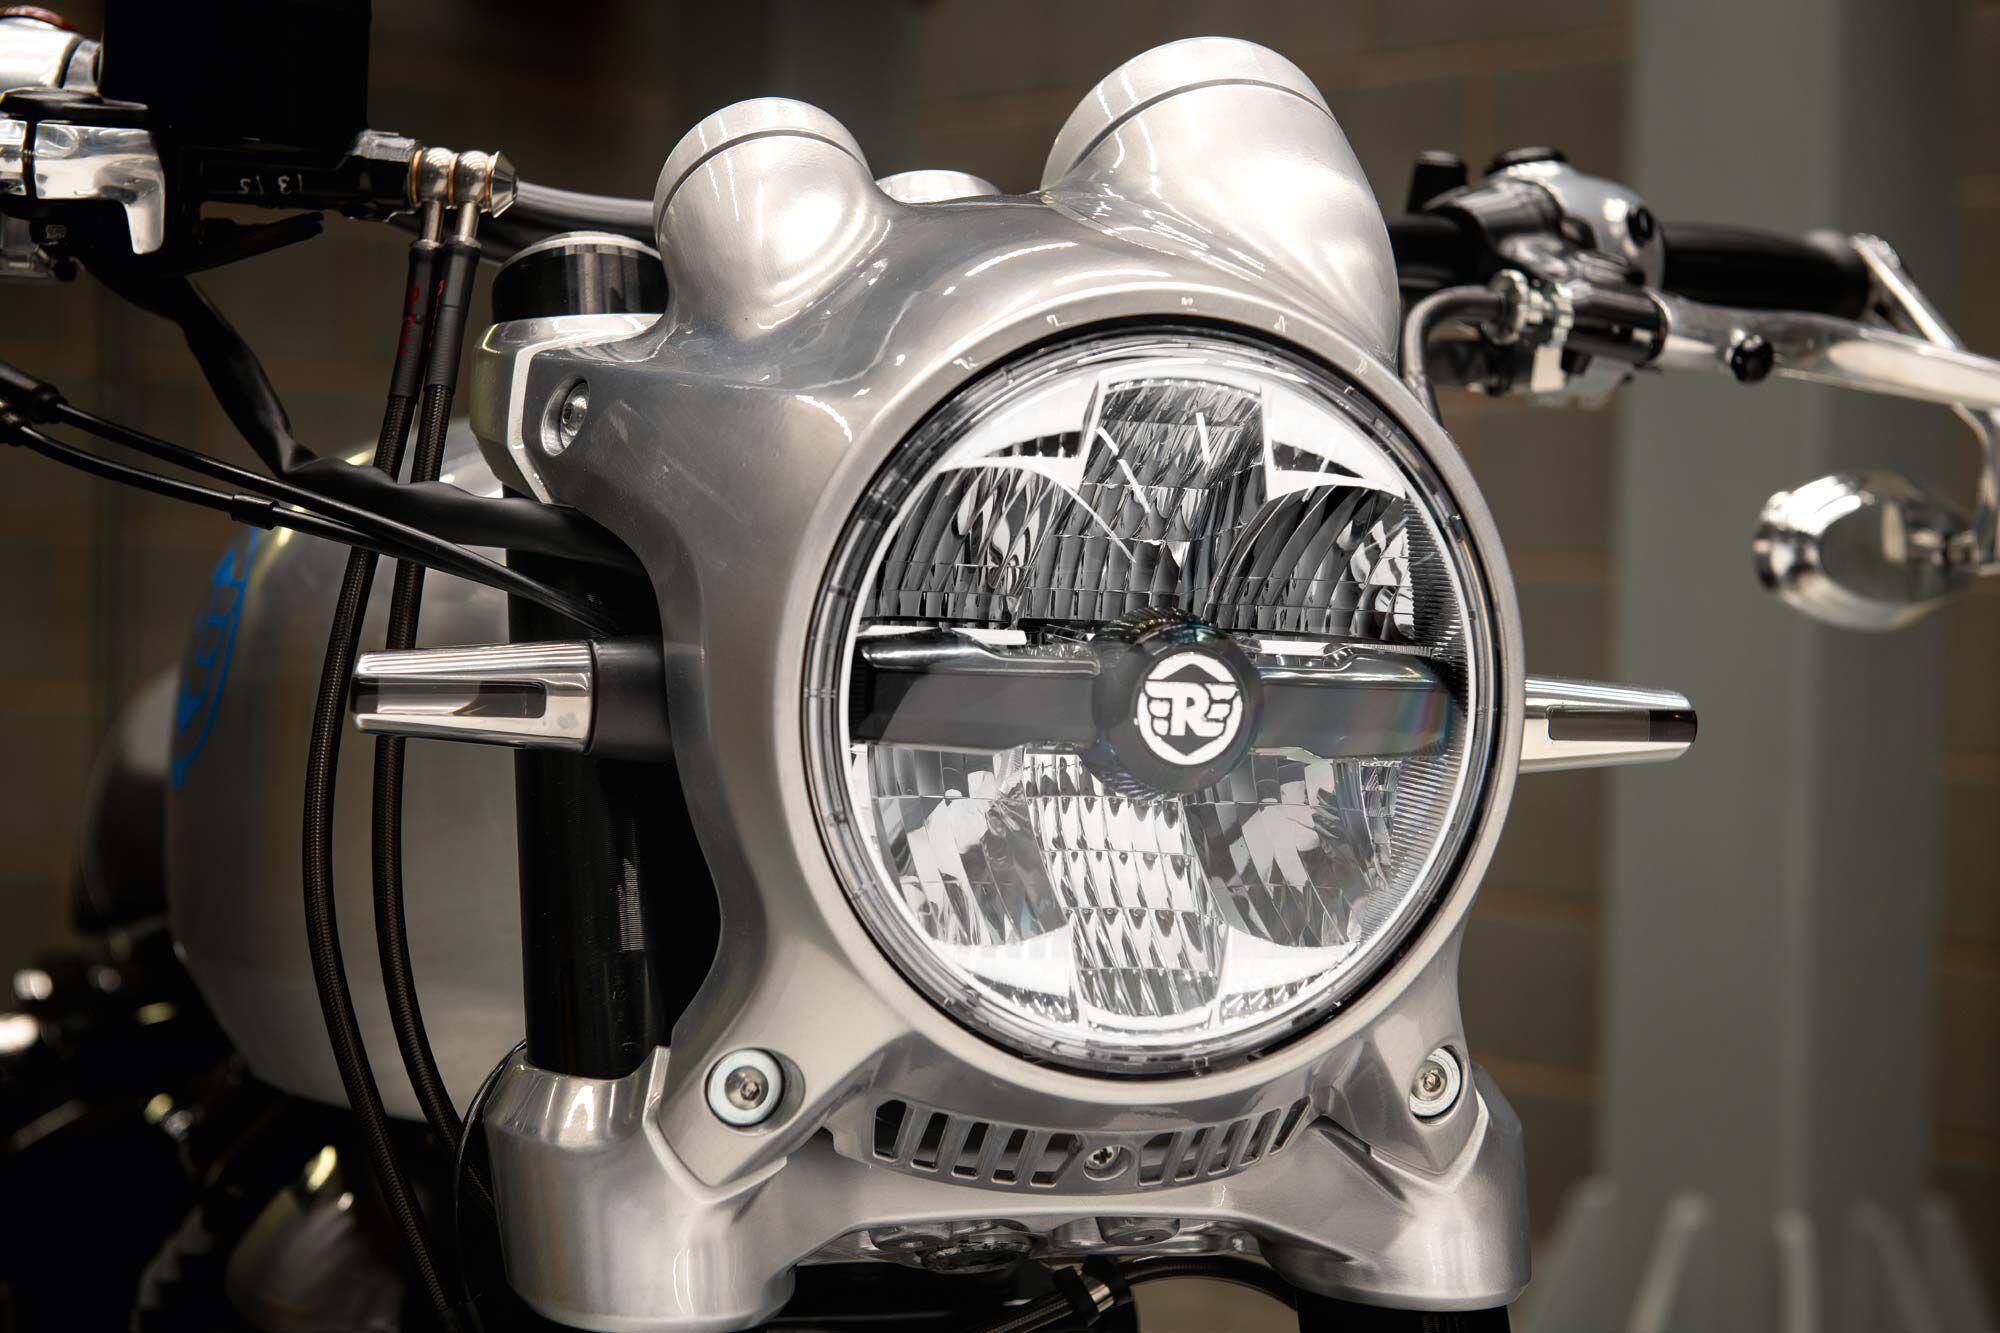 The headlight on the SG650 is machined from billet to house the gauges and bolt directly to the triple clamps.